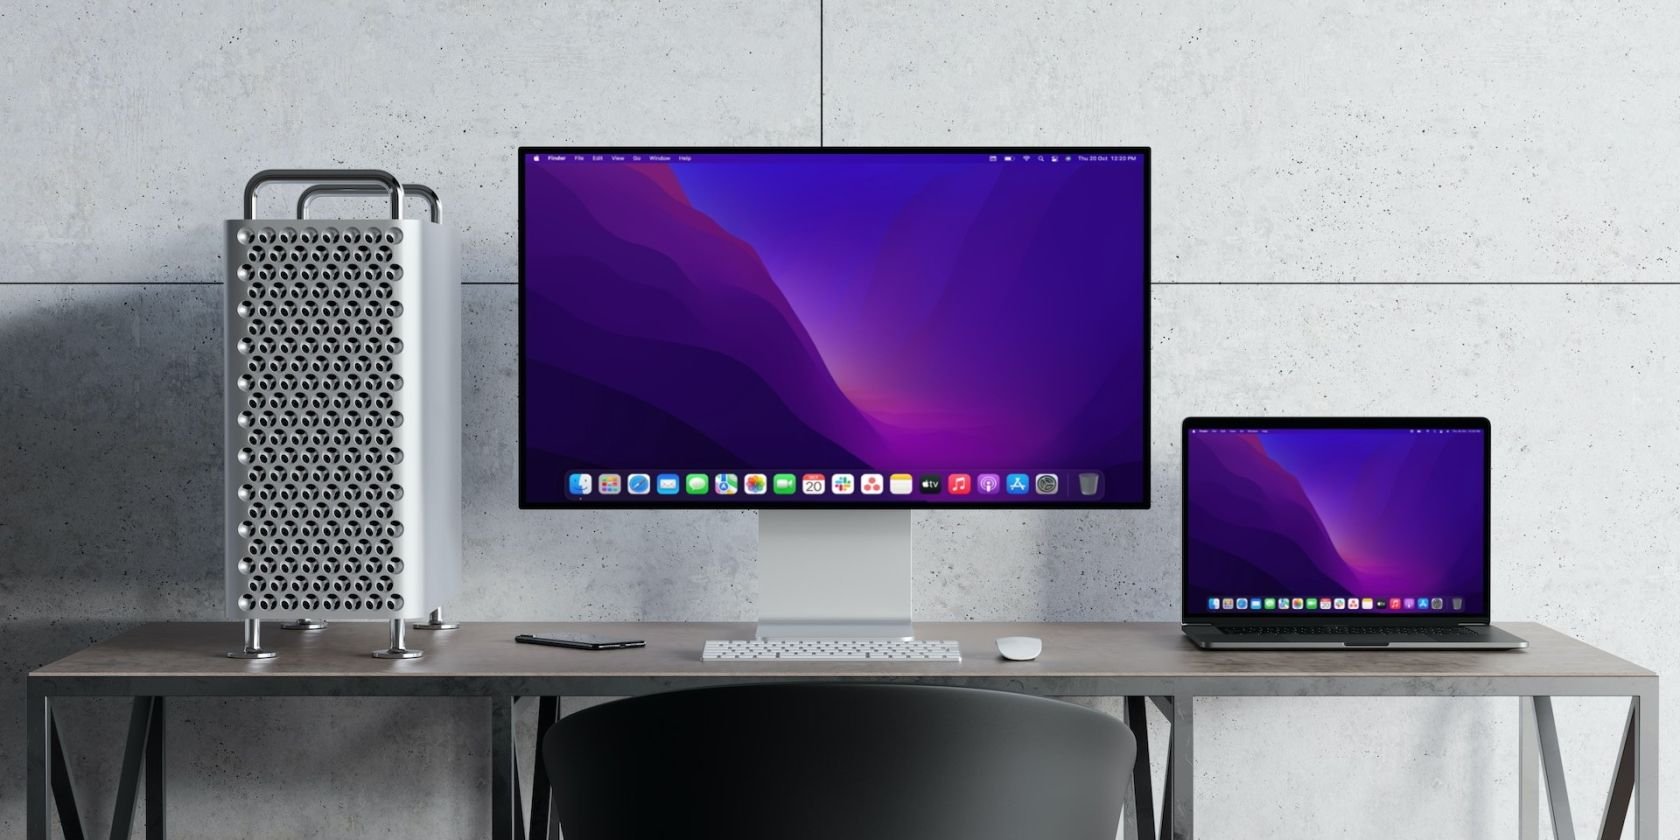 3 Ways to Downgrade to an Older Version of macOS